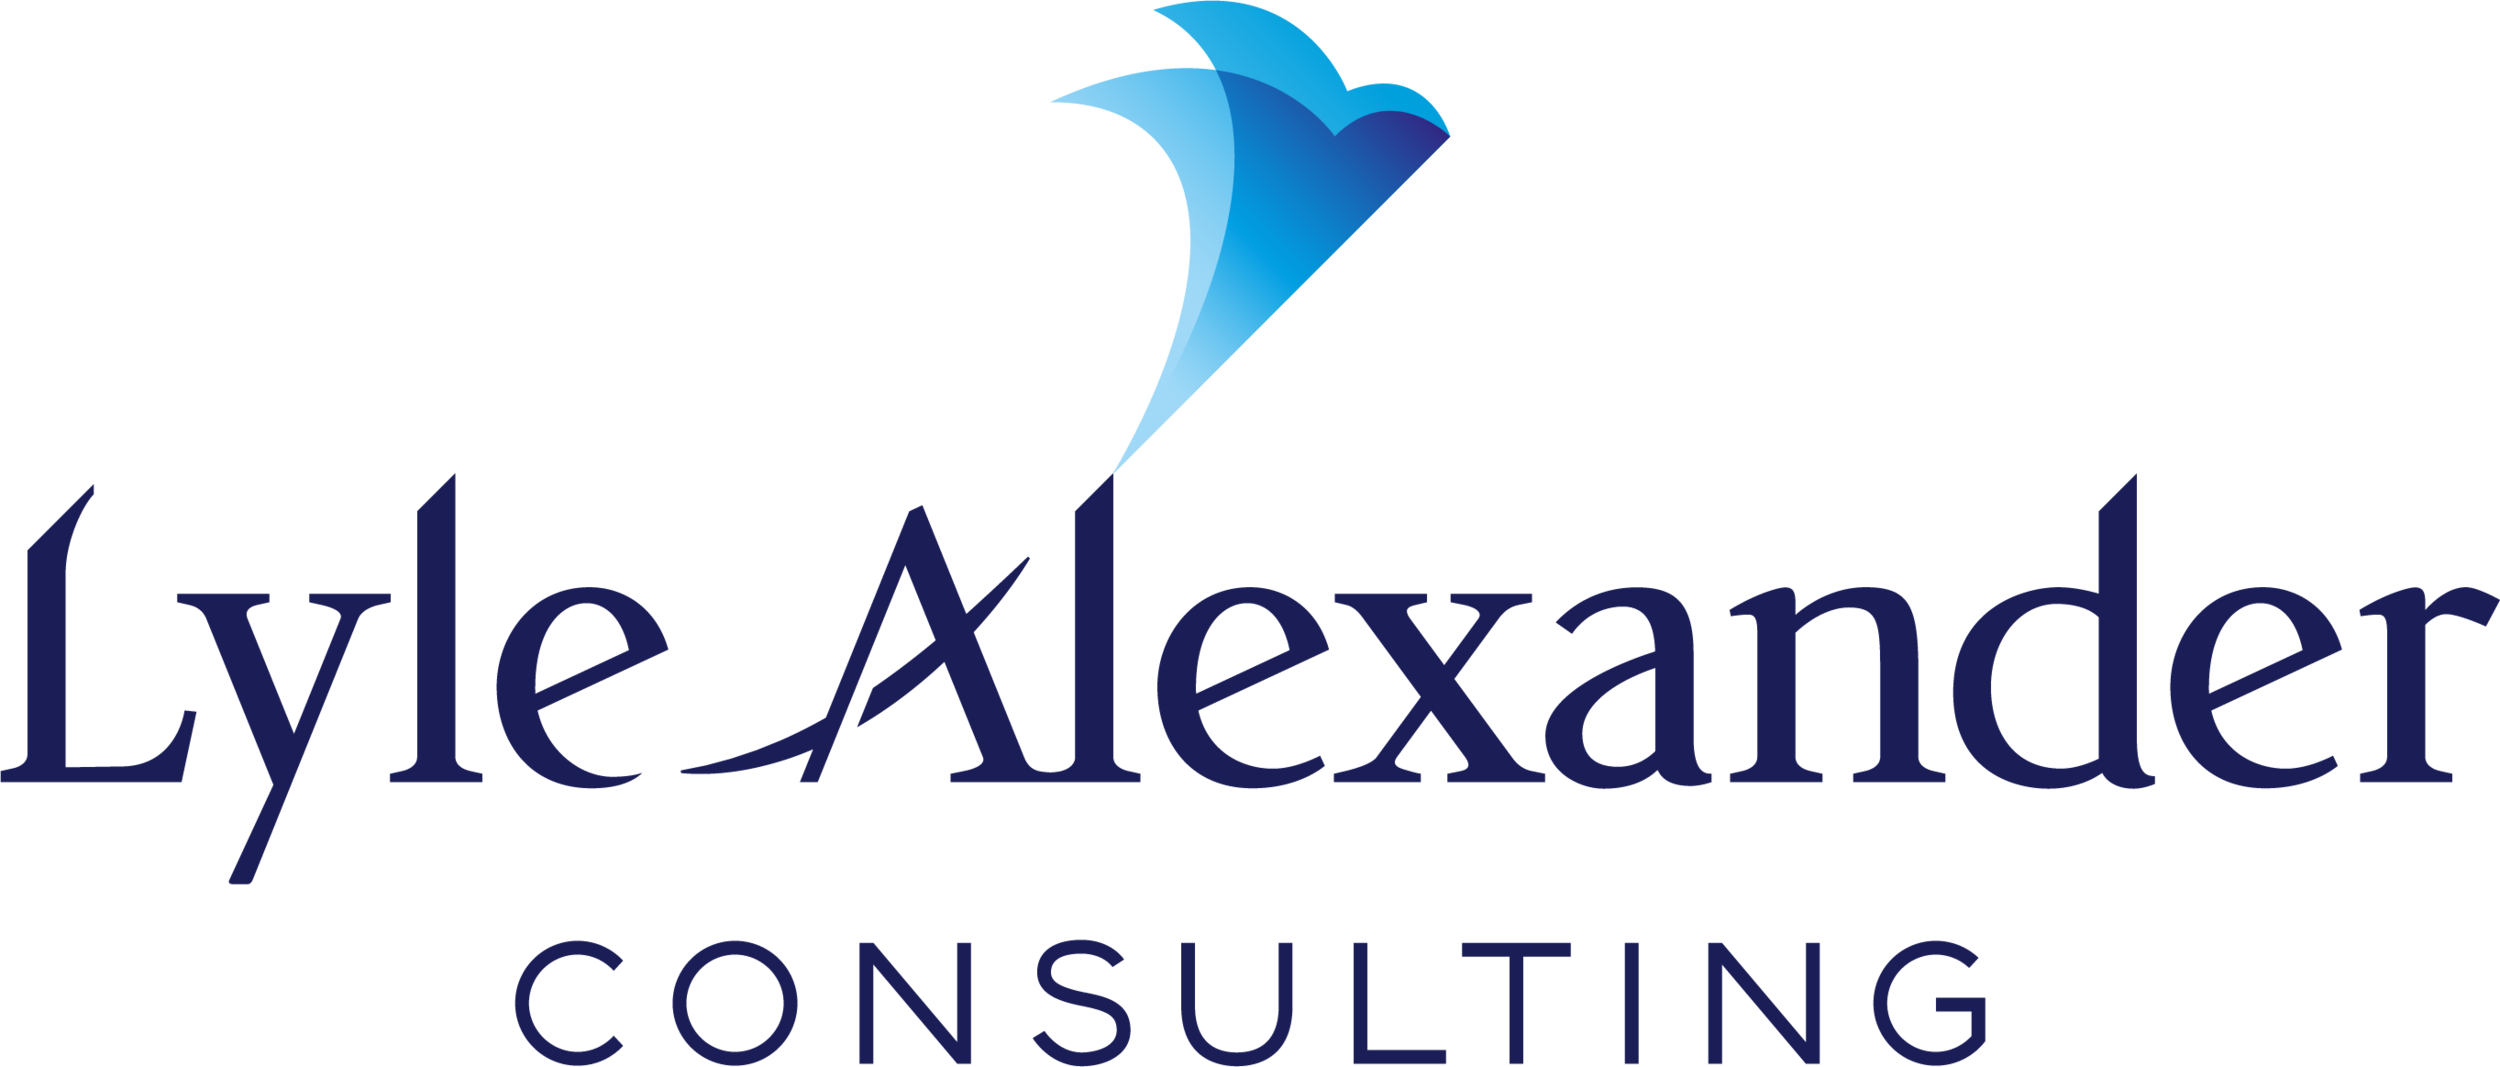 Lyle Alexander Consulting